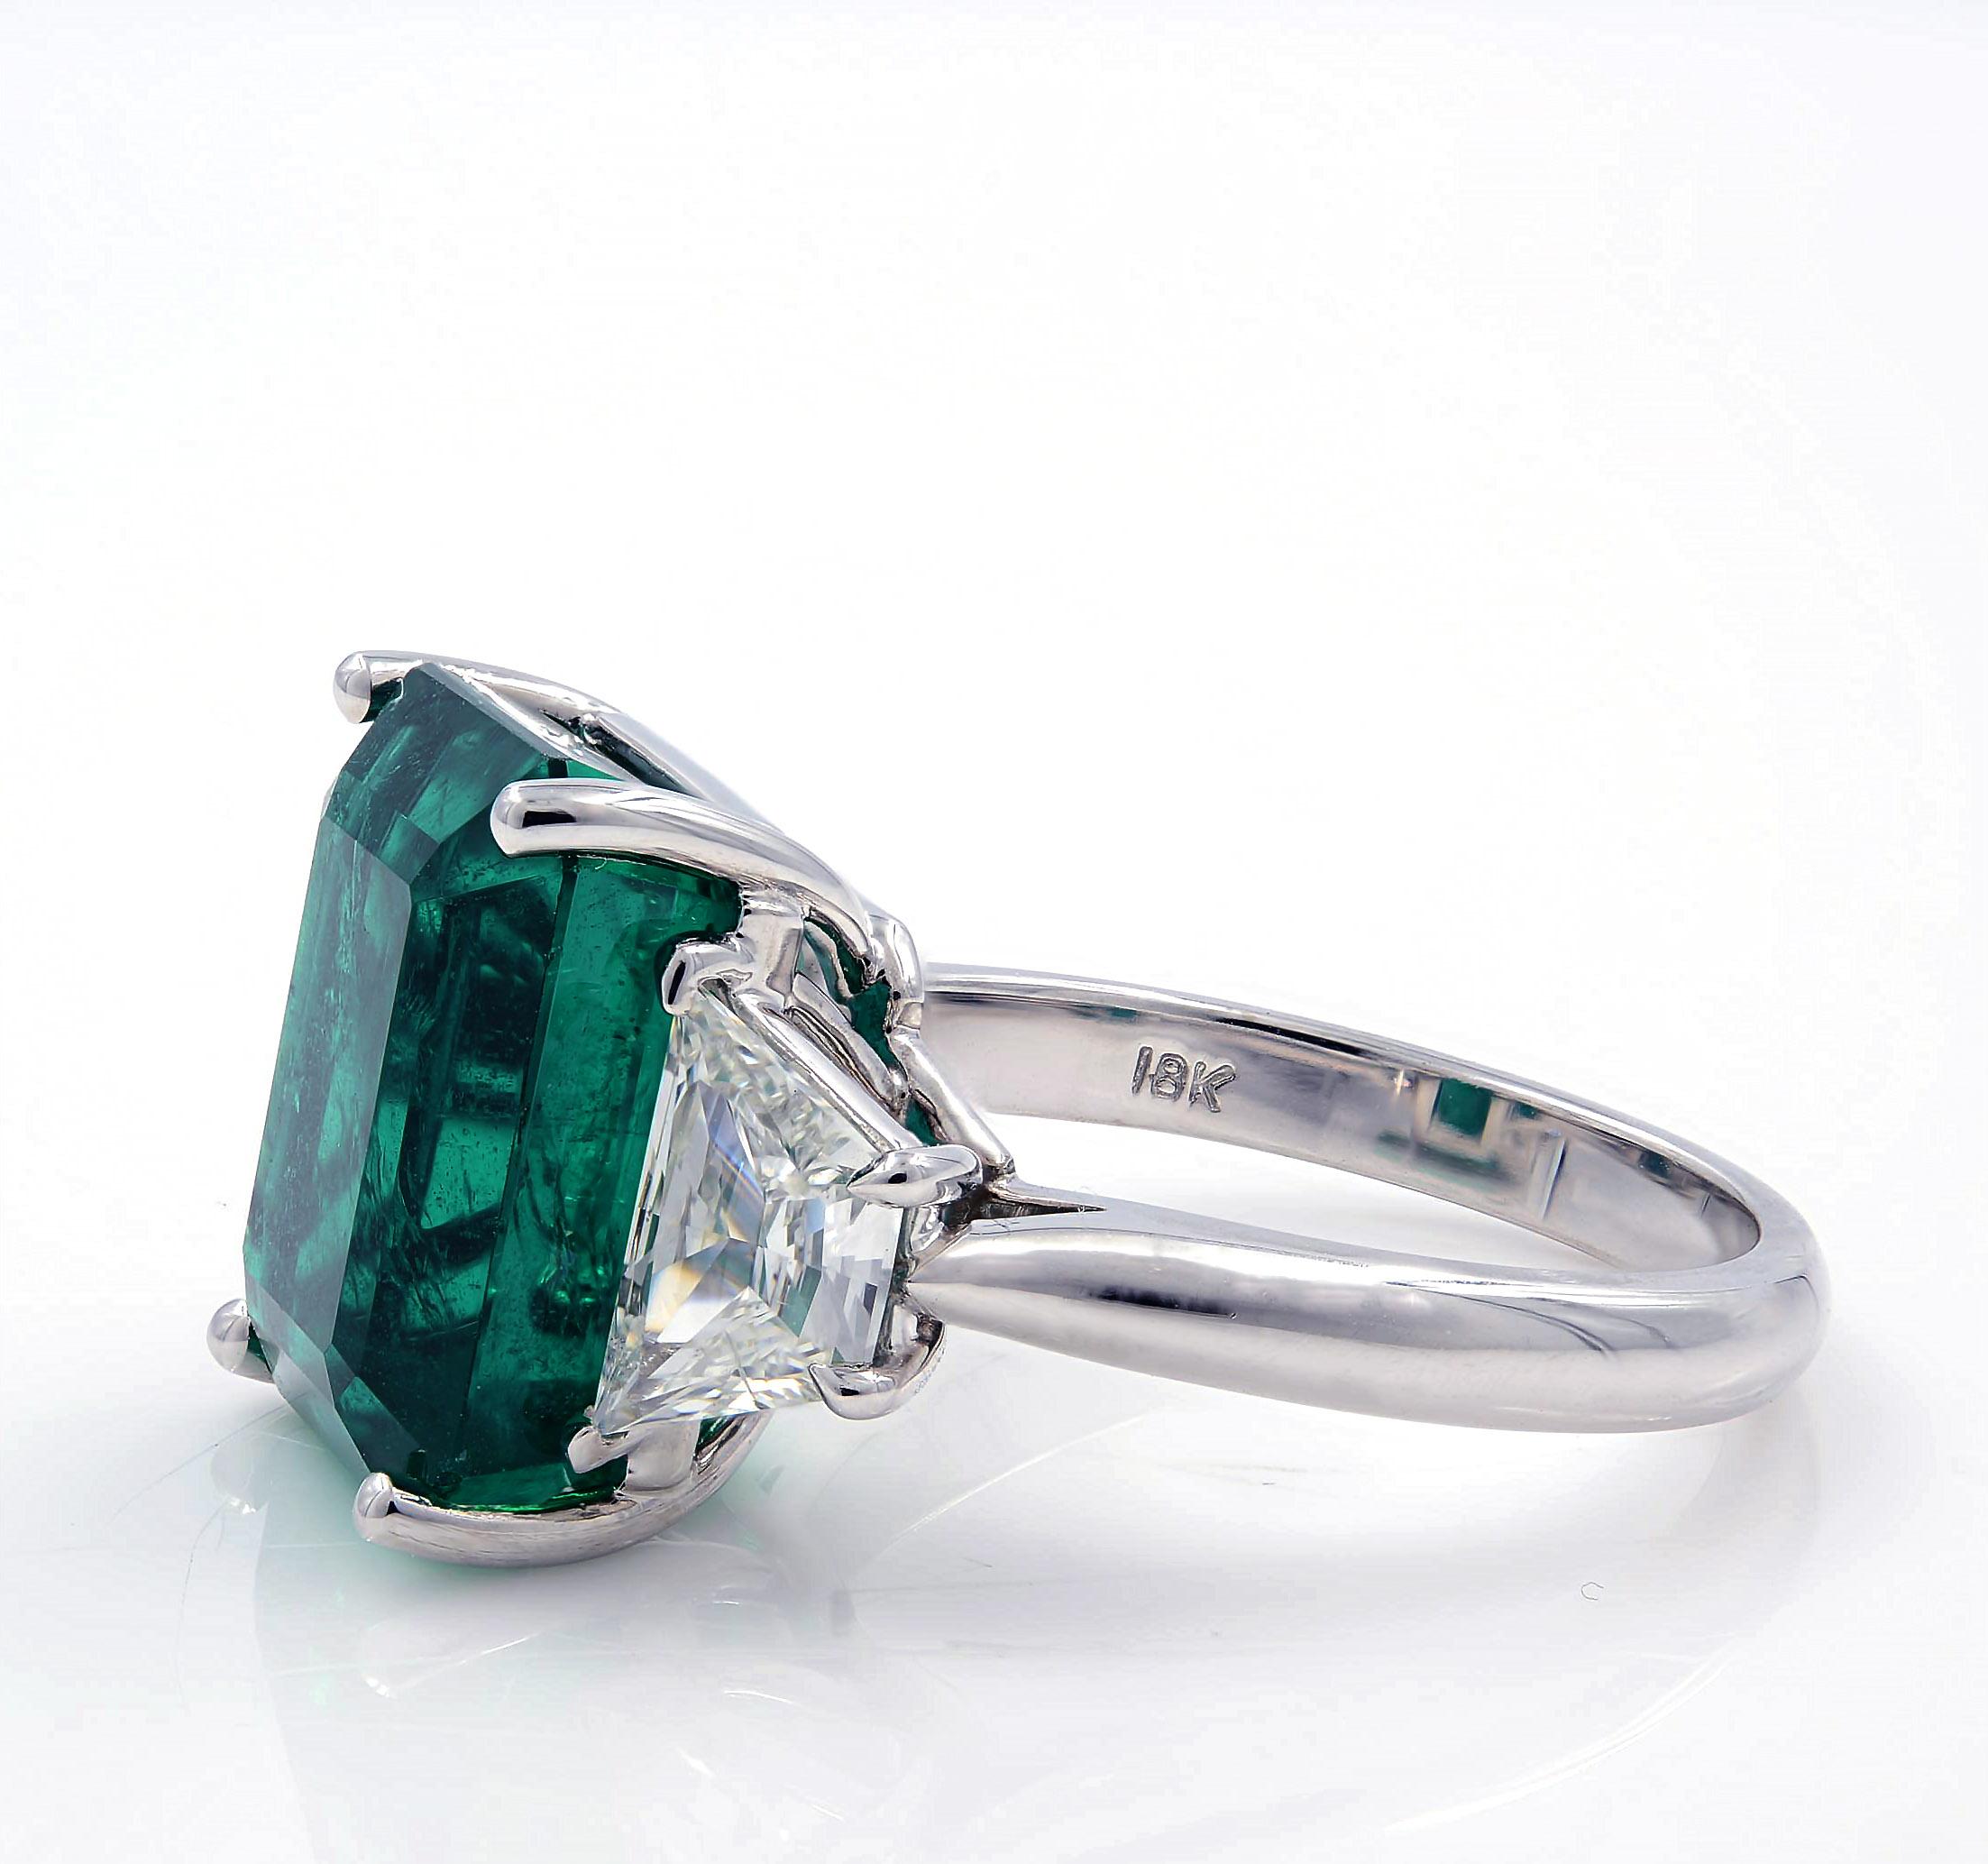 A gorgeous vibrant richly saturated green emerald-cut emerald of Zambian origin, weighing 9.39 carats, glistens between a sleek and gleaming pair of high color, high-quality trapezoid cut diamonds 1.21cts in this stunning right-hand ring, or